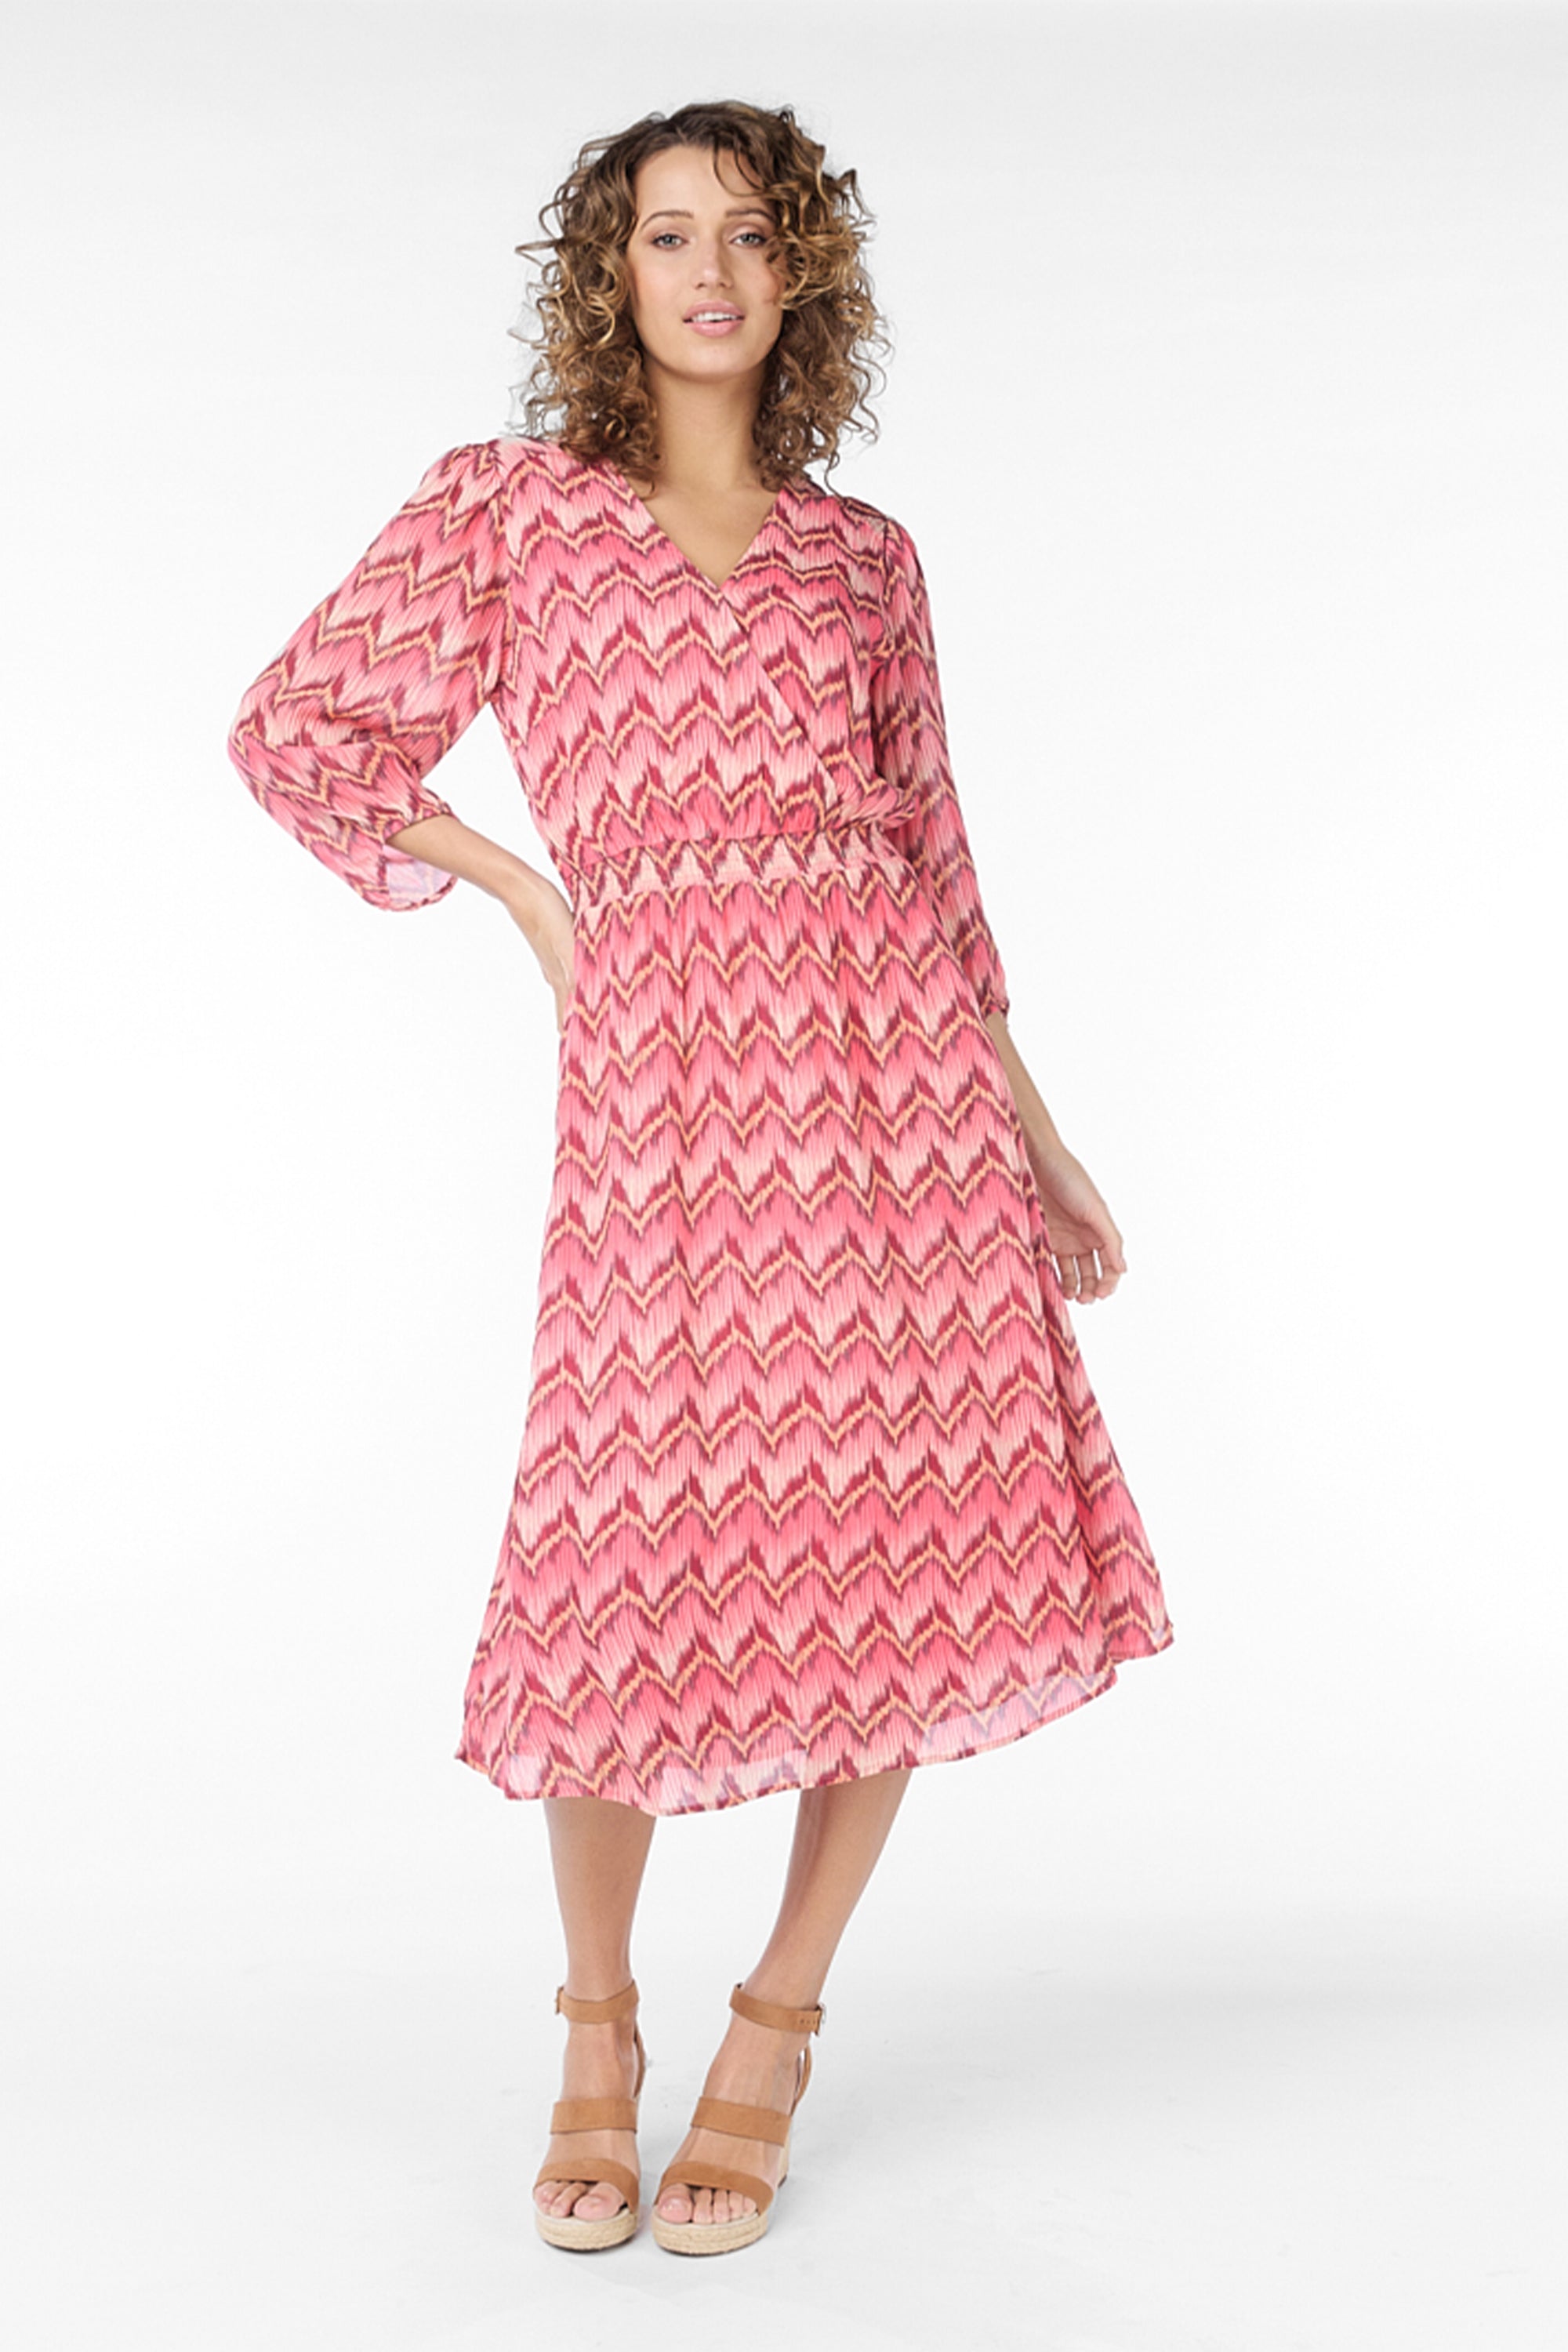 Front view of Esqualo (SP2414008) Women's 3/4 Sleeve V-Neck Midi Day Dress in a Pink ZigZag Print